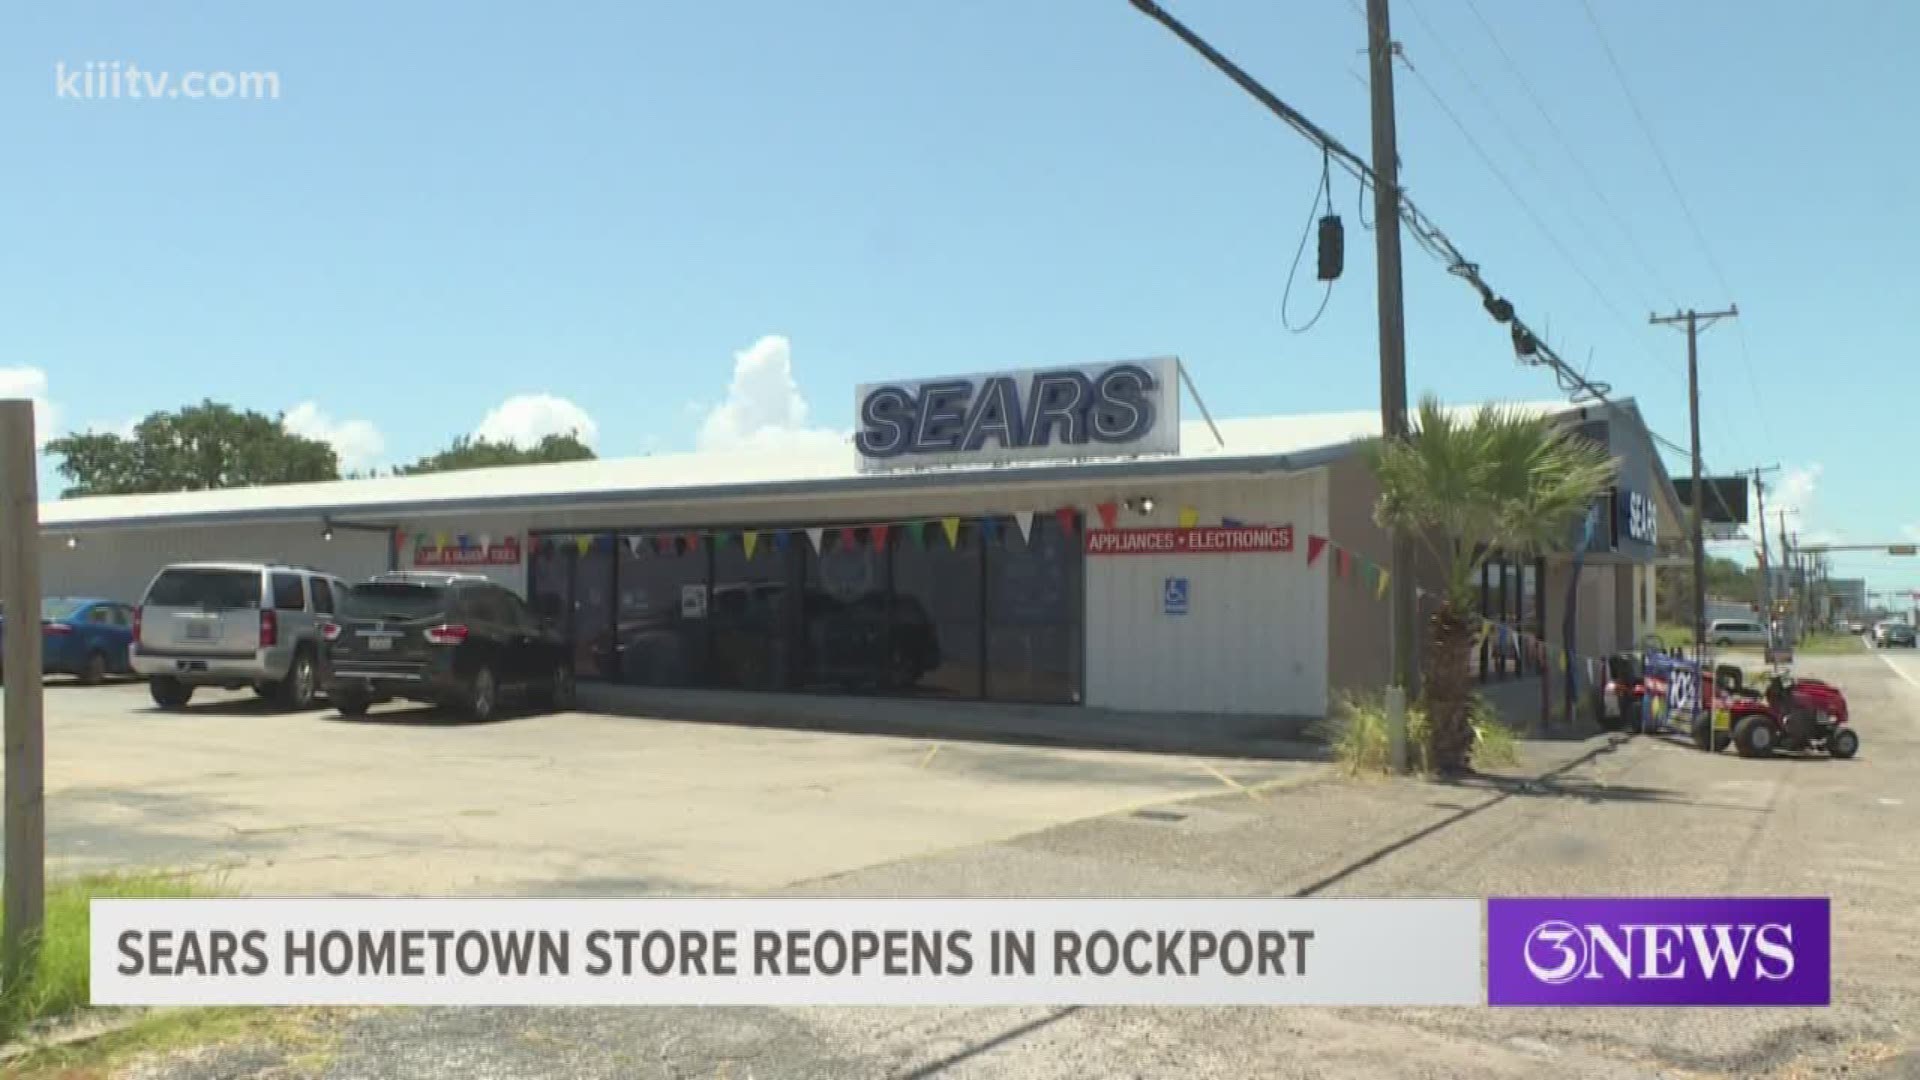 The Hometown Store is located on Highway 35 and survived Hurricane Harvey nearly two years ago with just some broken windows and damaged inventory.